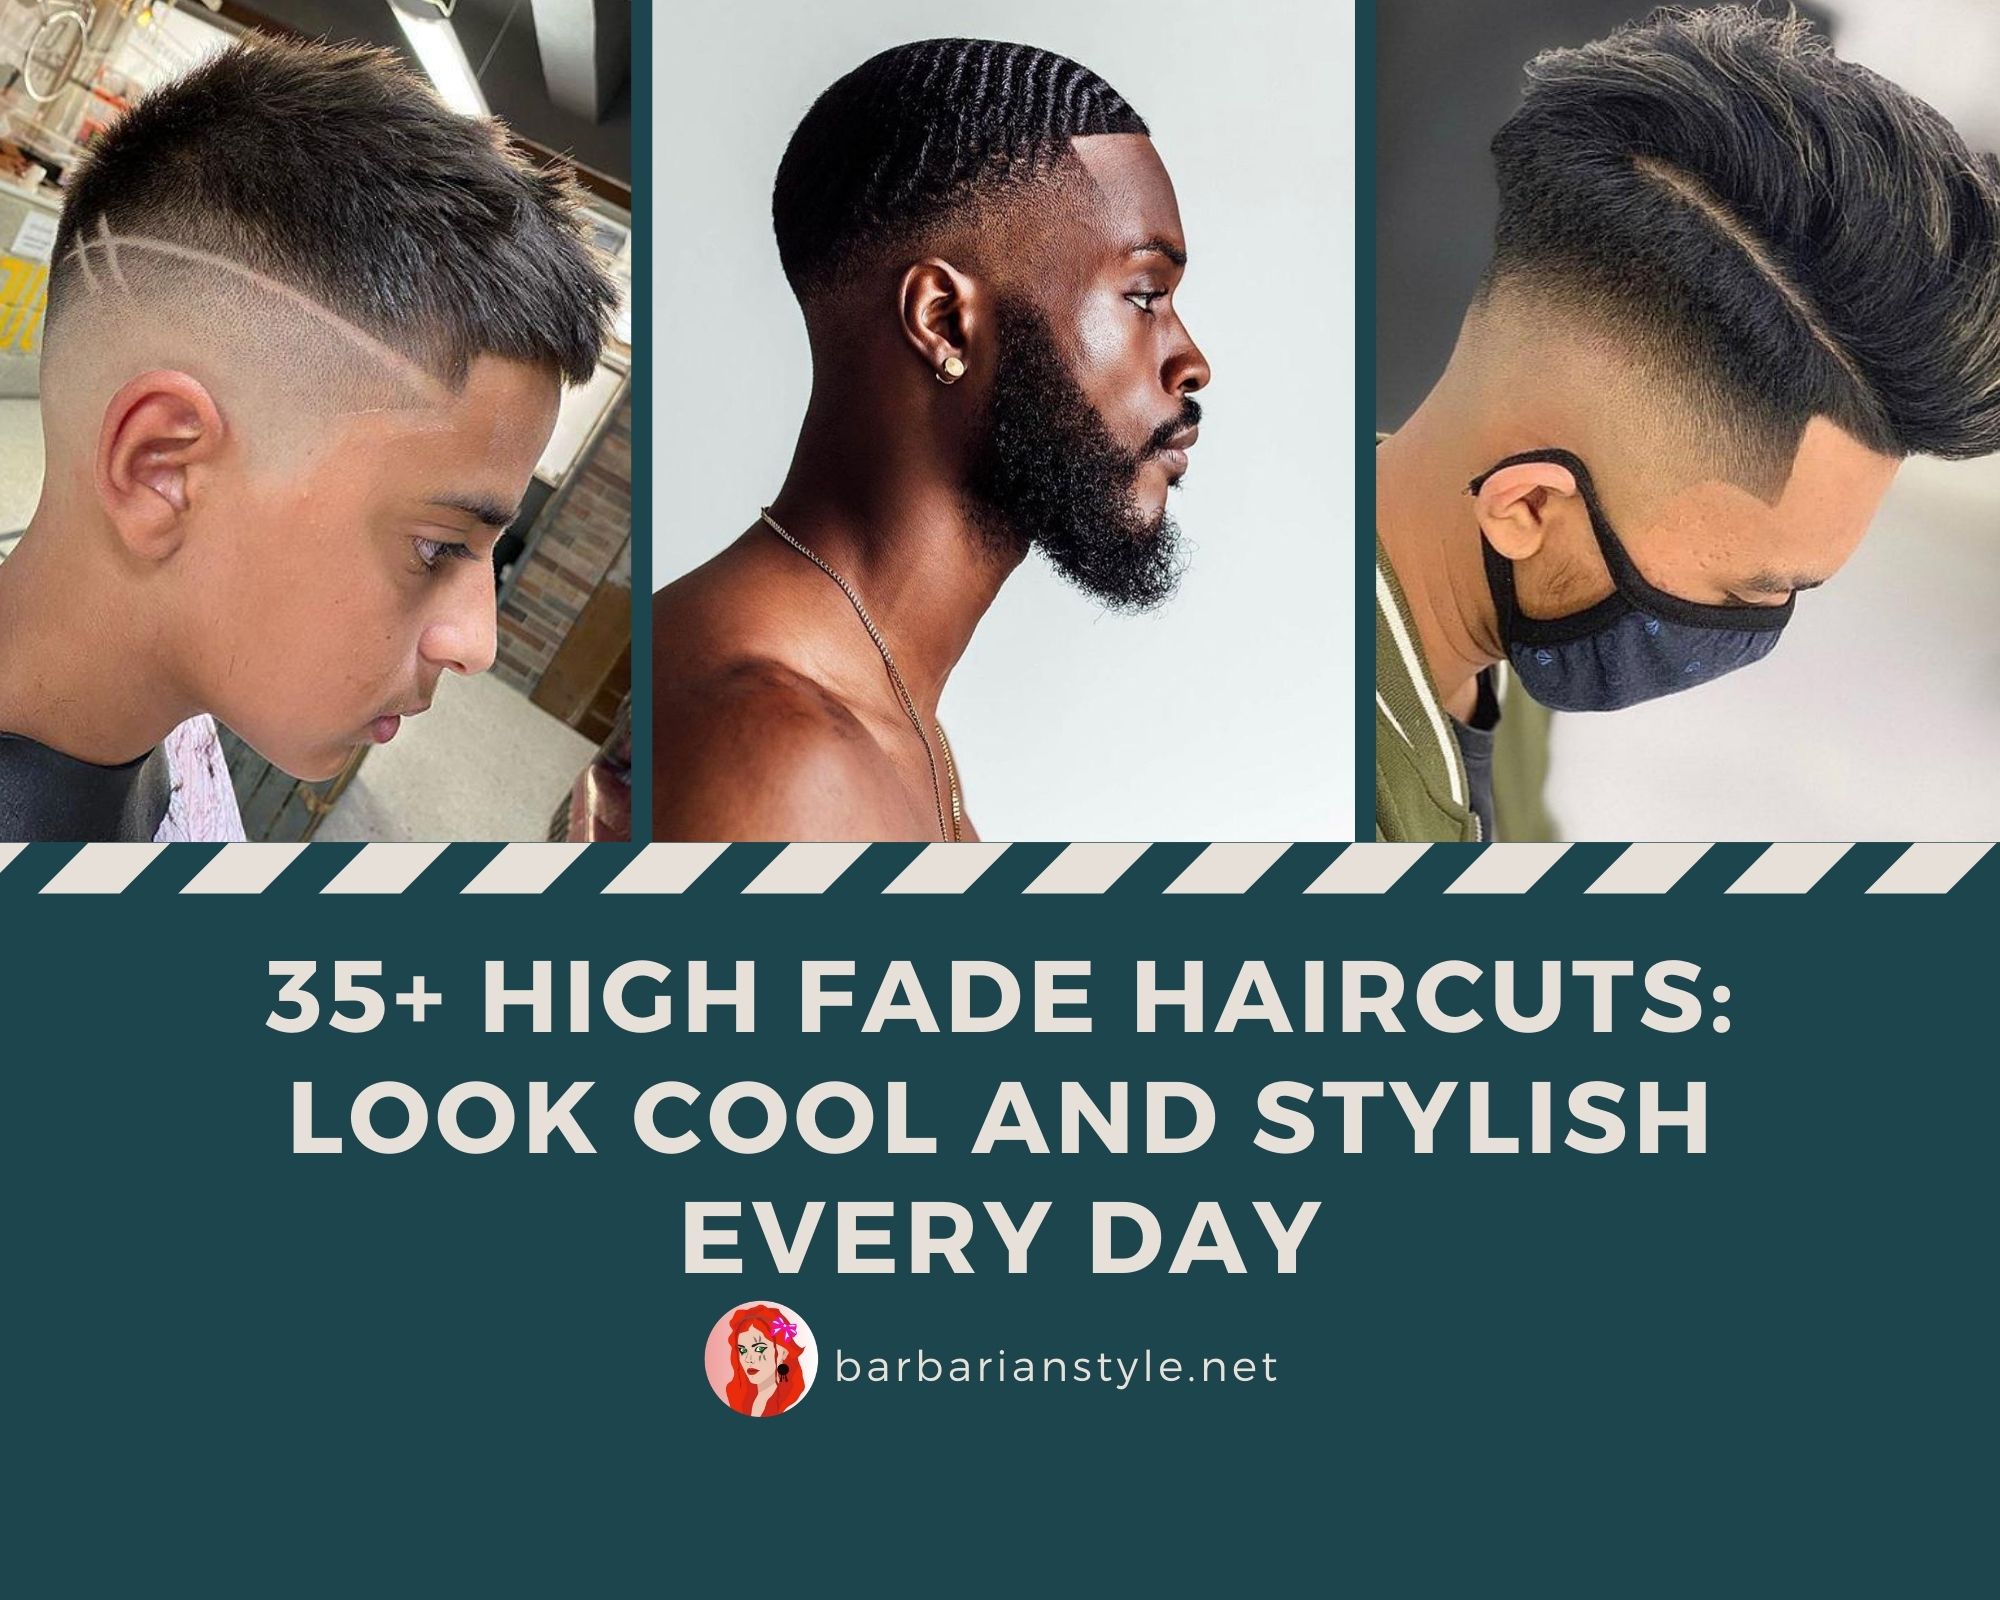 35+ High Fade Haircuts: Look Cool and Stylish Every Day